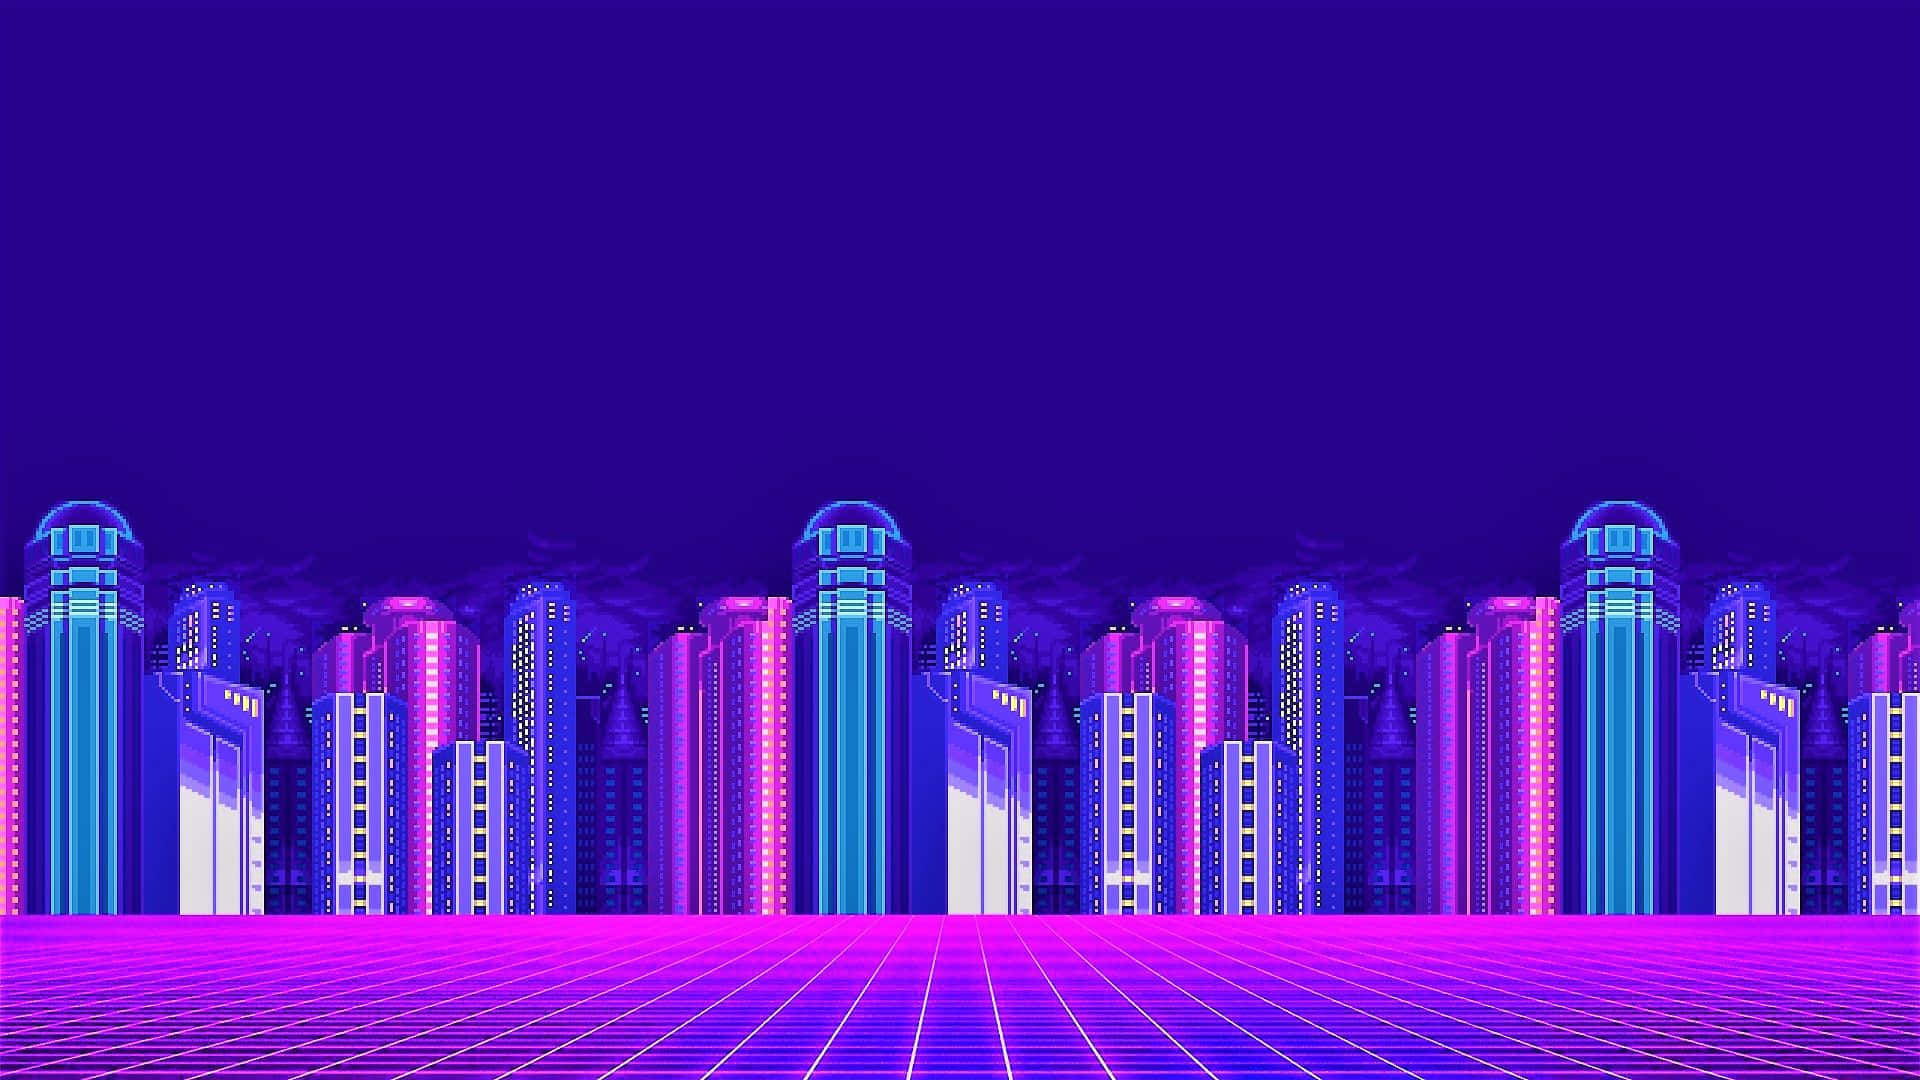 "Stay connected and enjoy modern technology with our sleek Vaporwave Tablet." Wallpaper